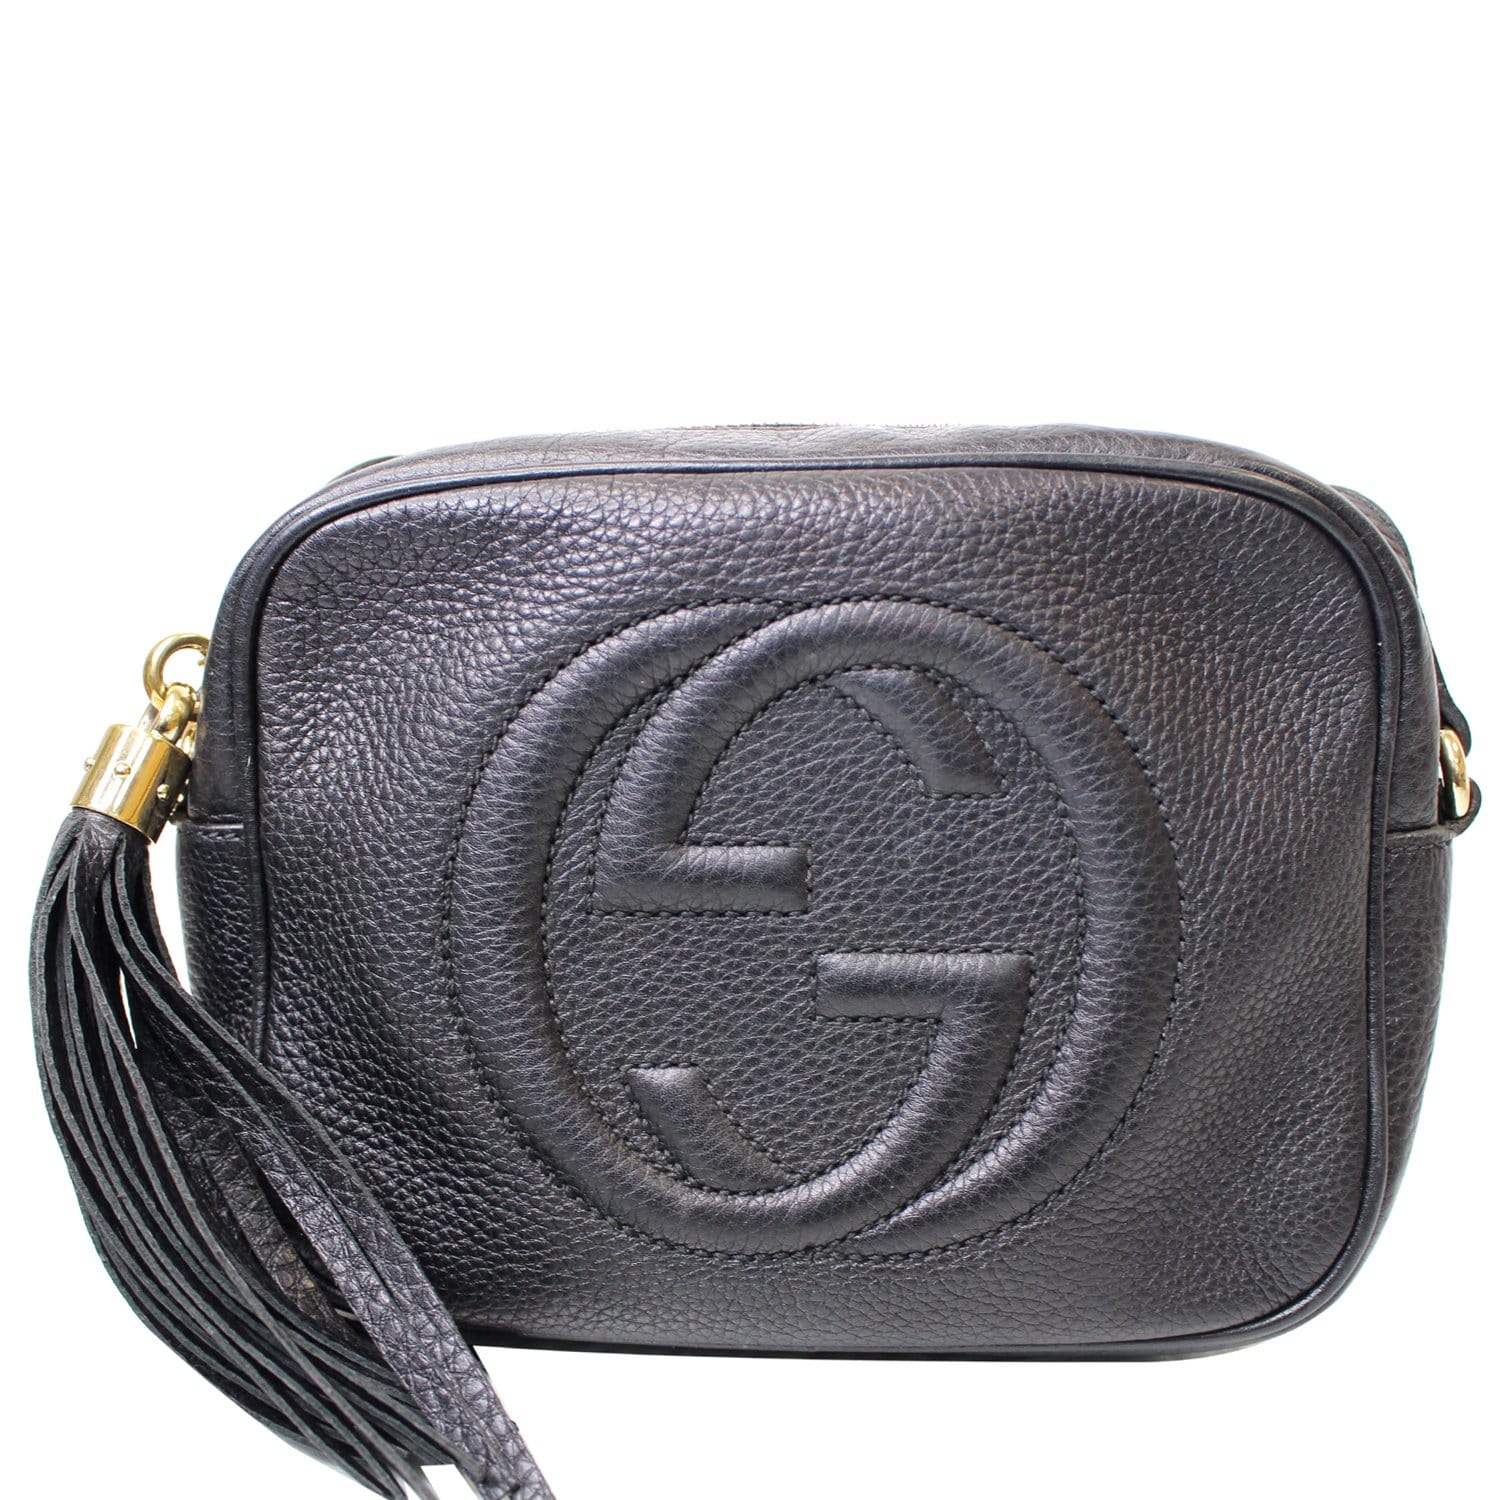 Gucci replicas expert - buy the best quality fake Gucci - Xpurse